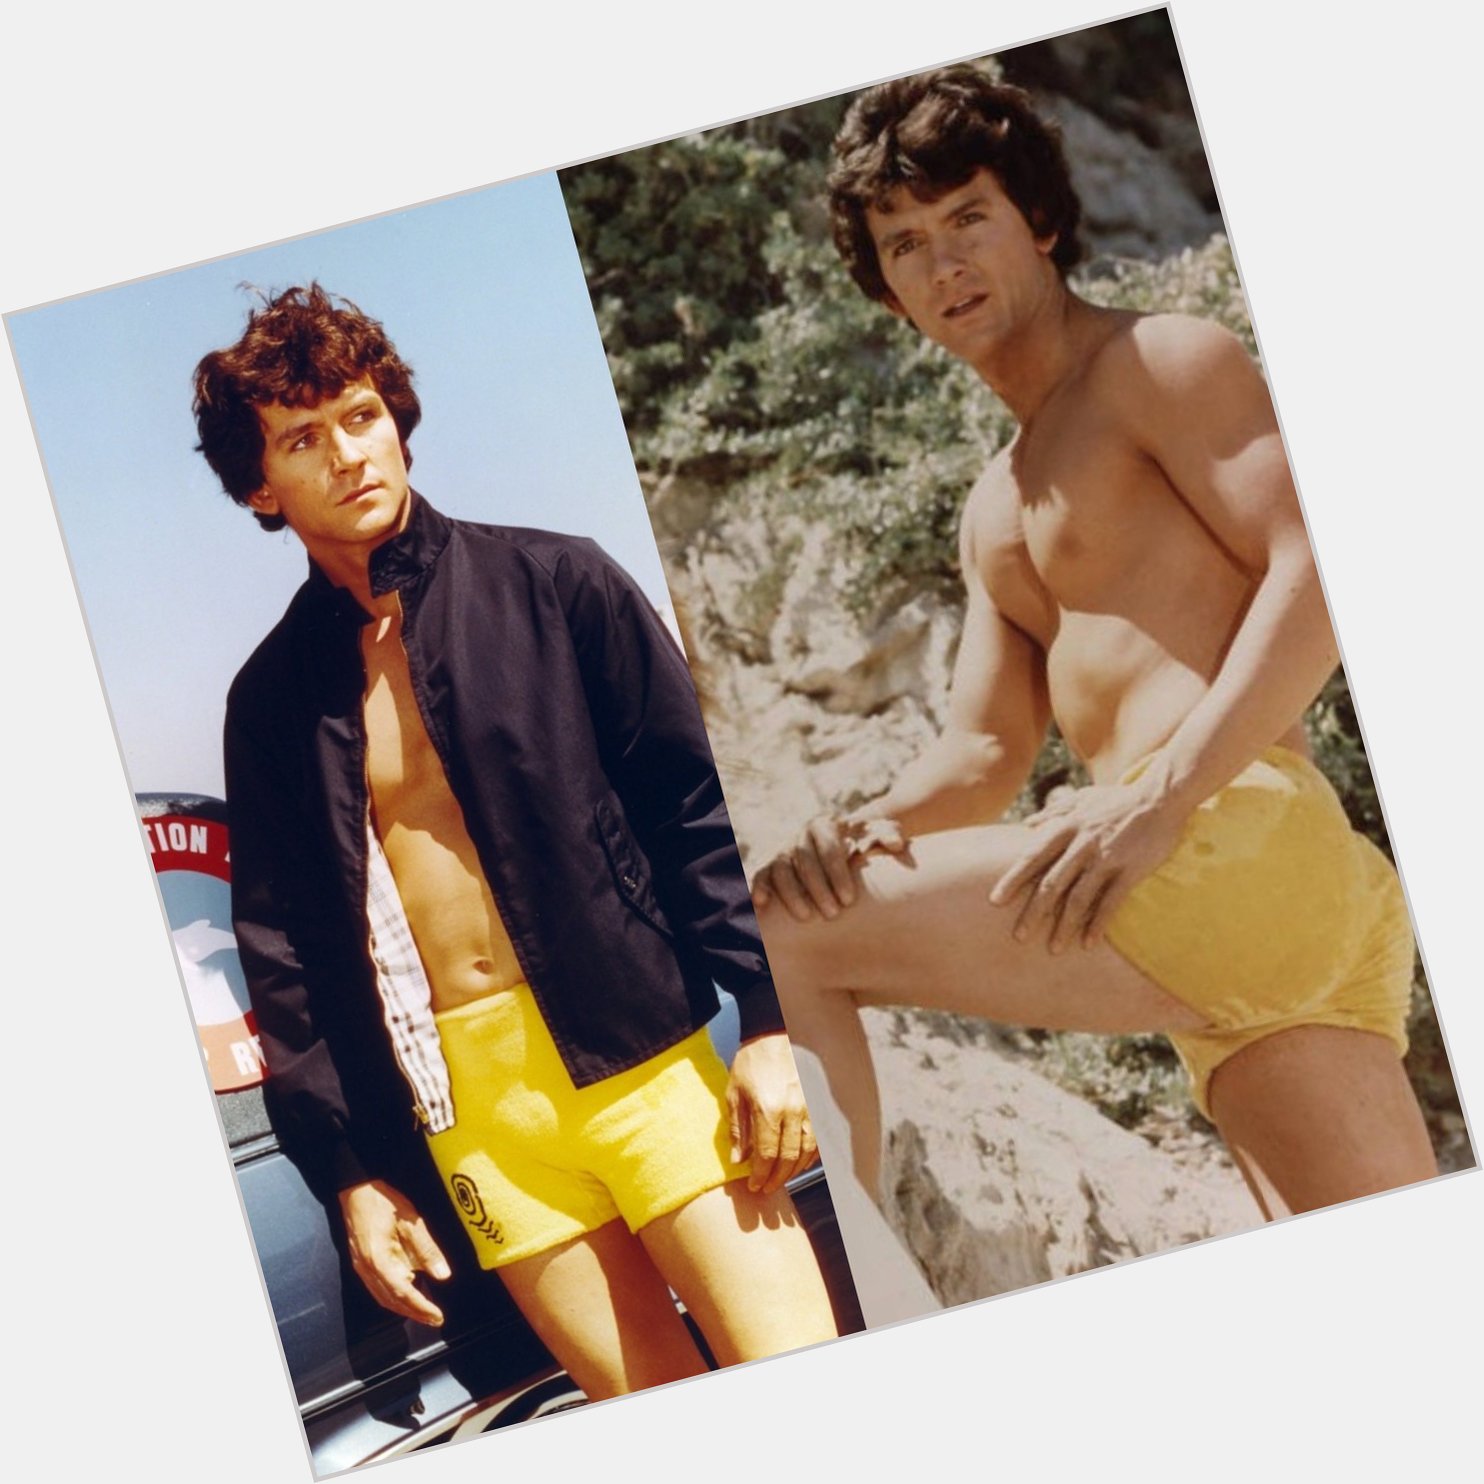 Happy birthday to Patrick Duffy and to his pre-OnlyFans Man from Atlantis butt shot!  